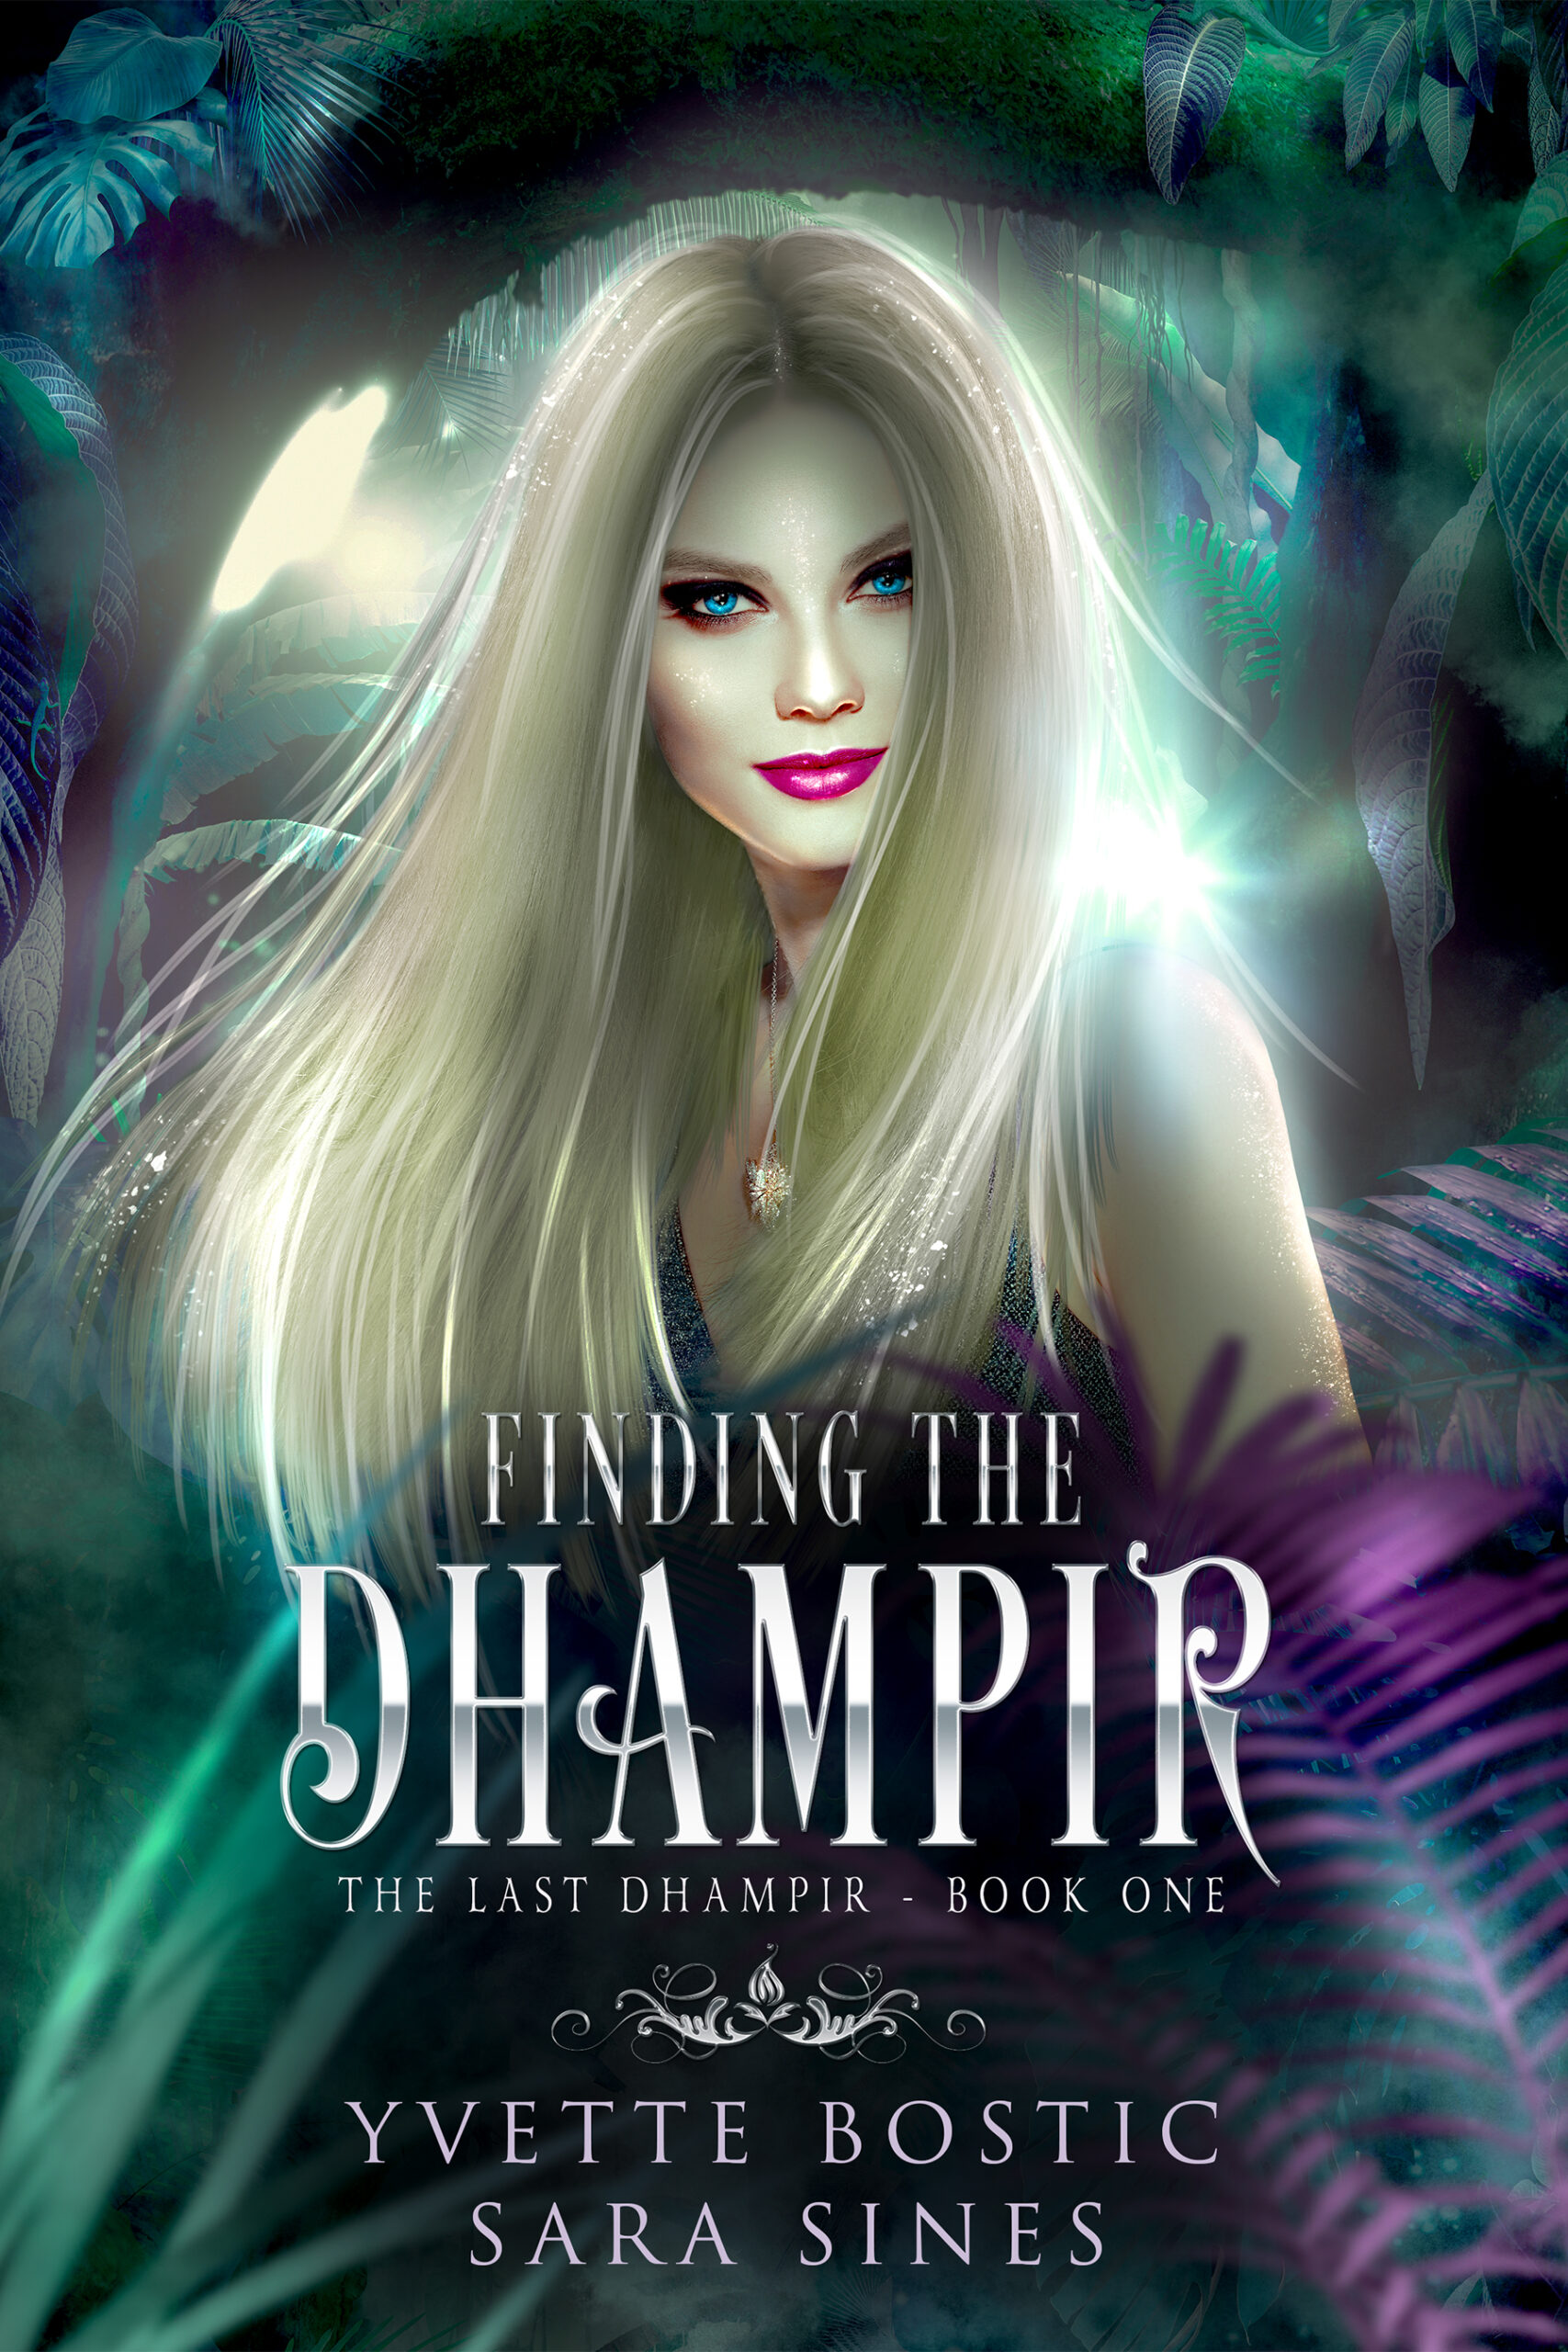 Finding the Dhampir by Yvette Bostic and Sara Sines - Realm of Midnight